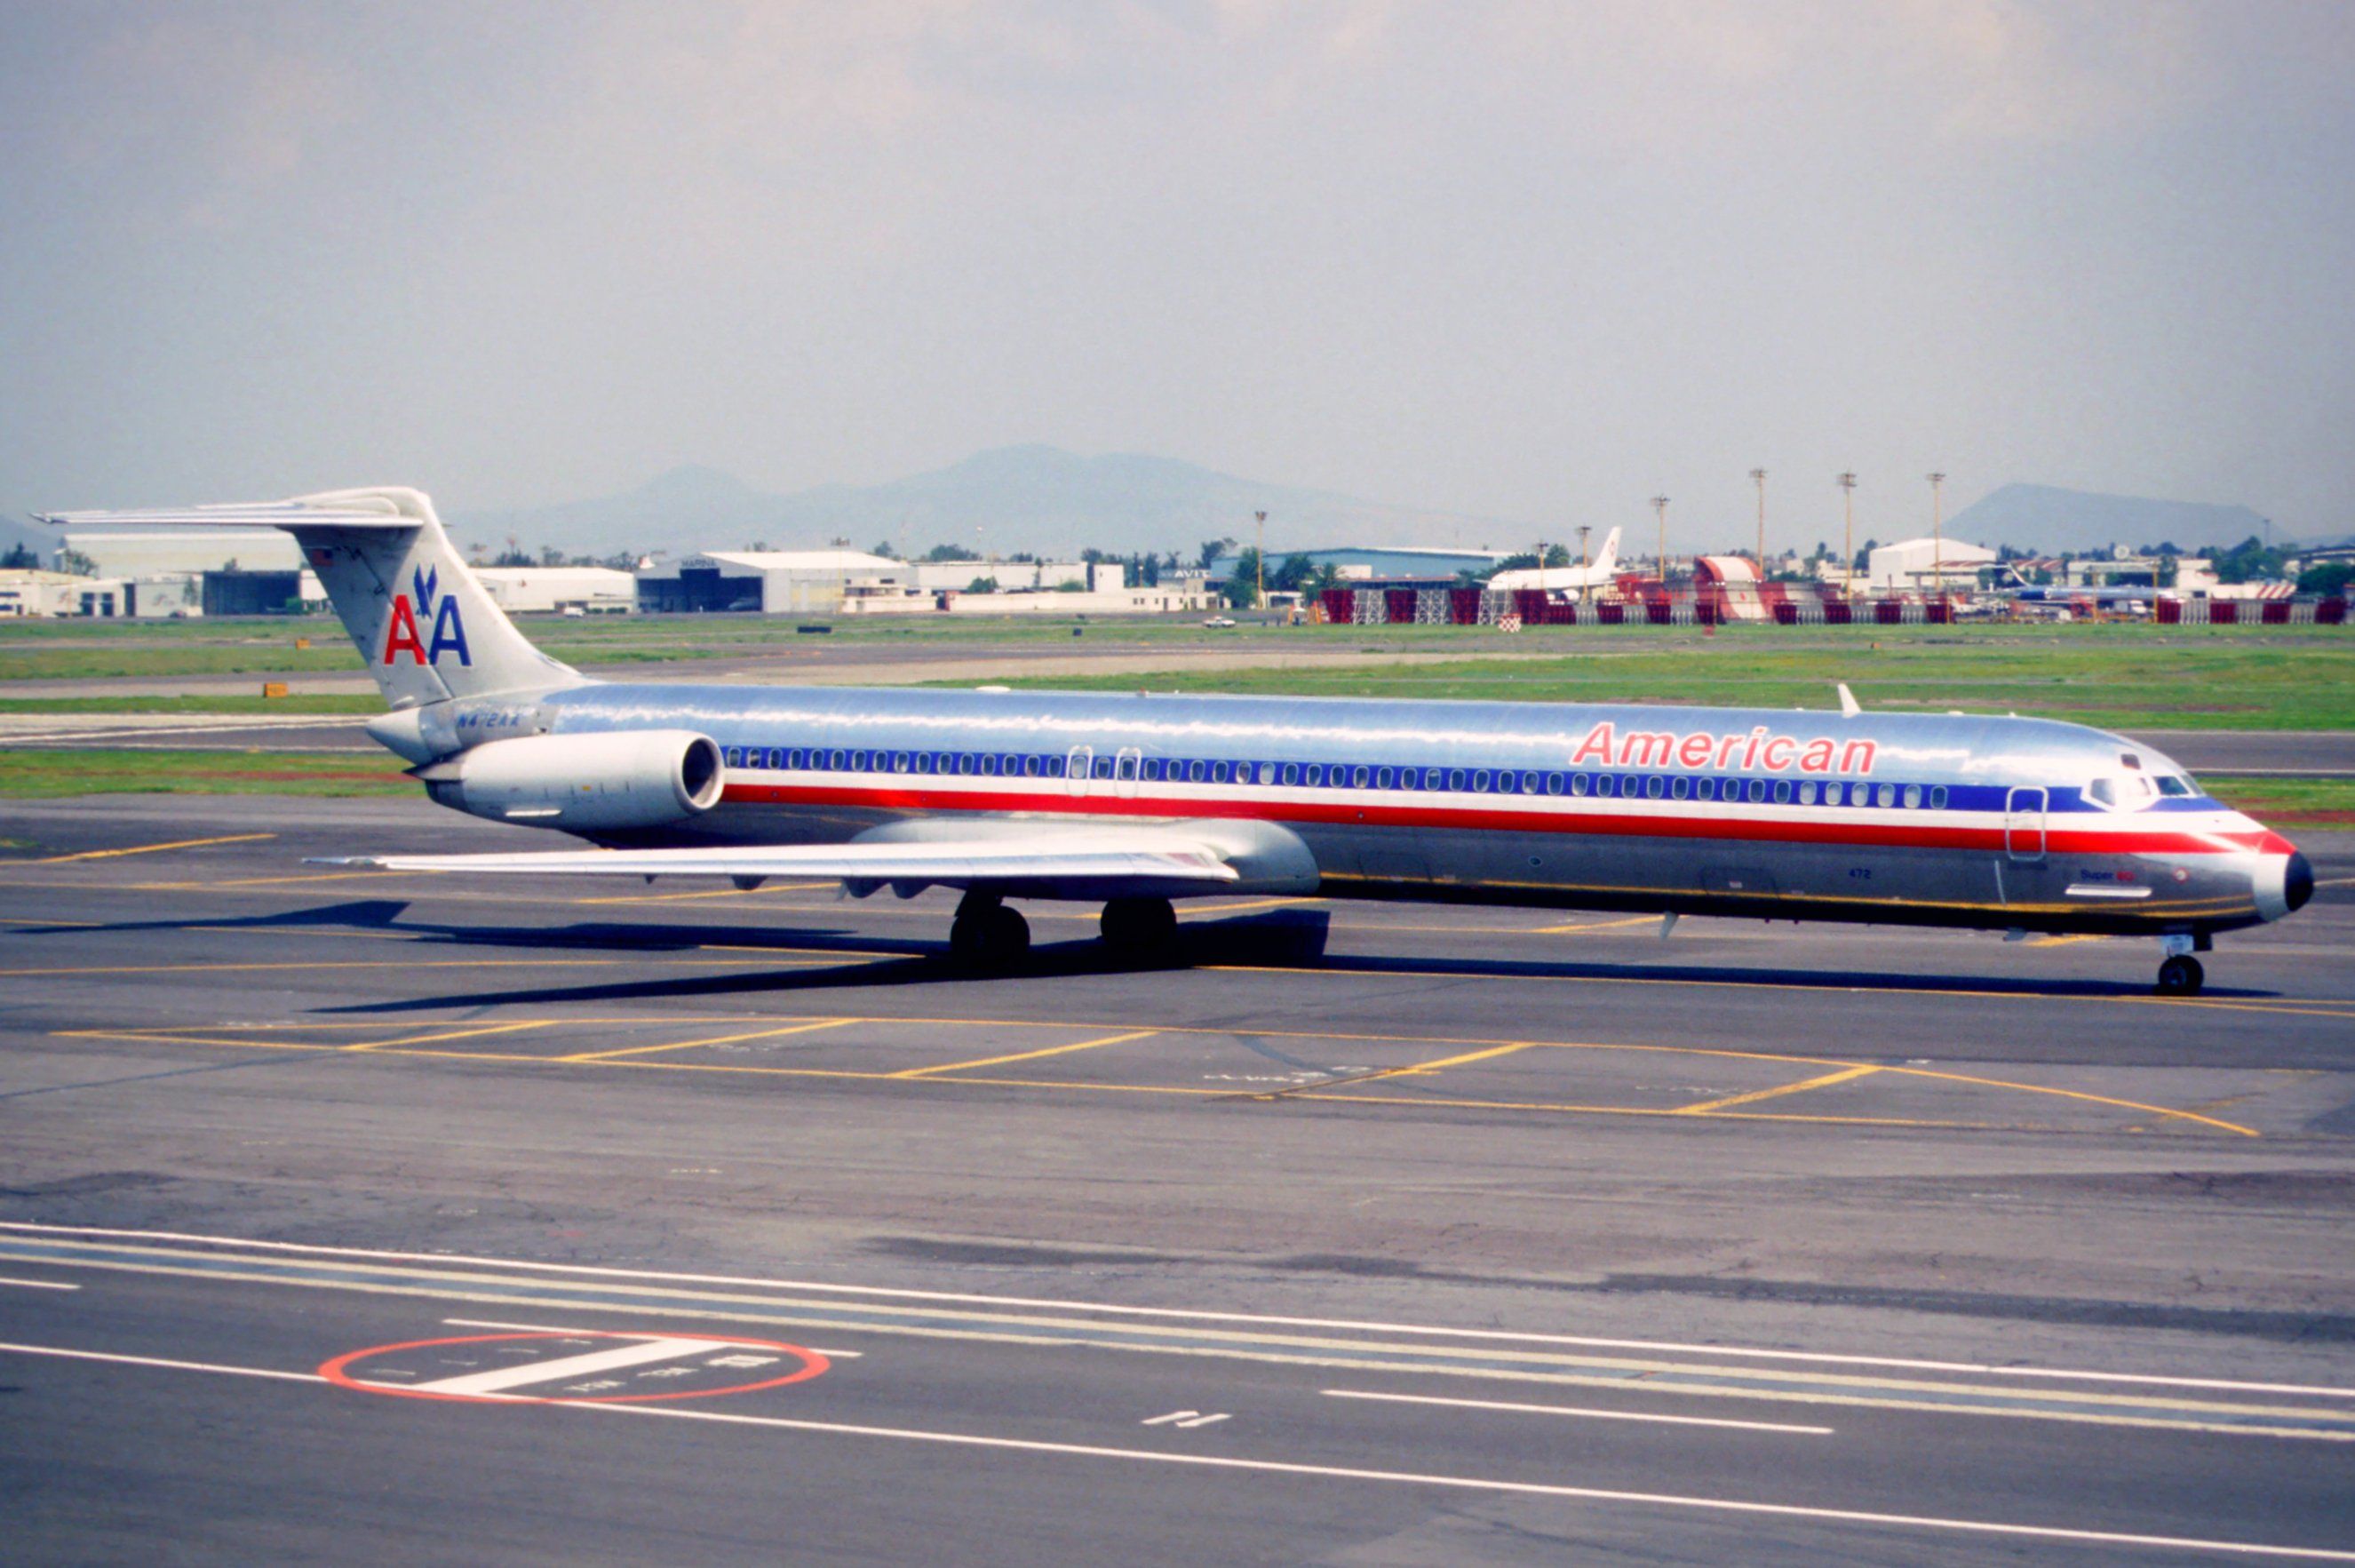 250gd_-_American_Airlines_MD-82,_N472AA@MEX,24.07.2003_-_Flickr_-_Aero_Icarus